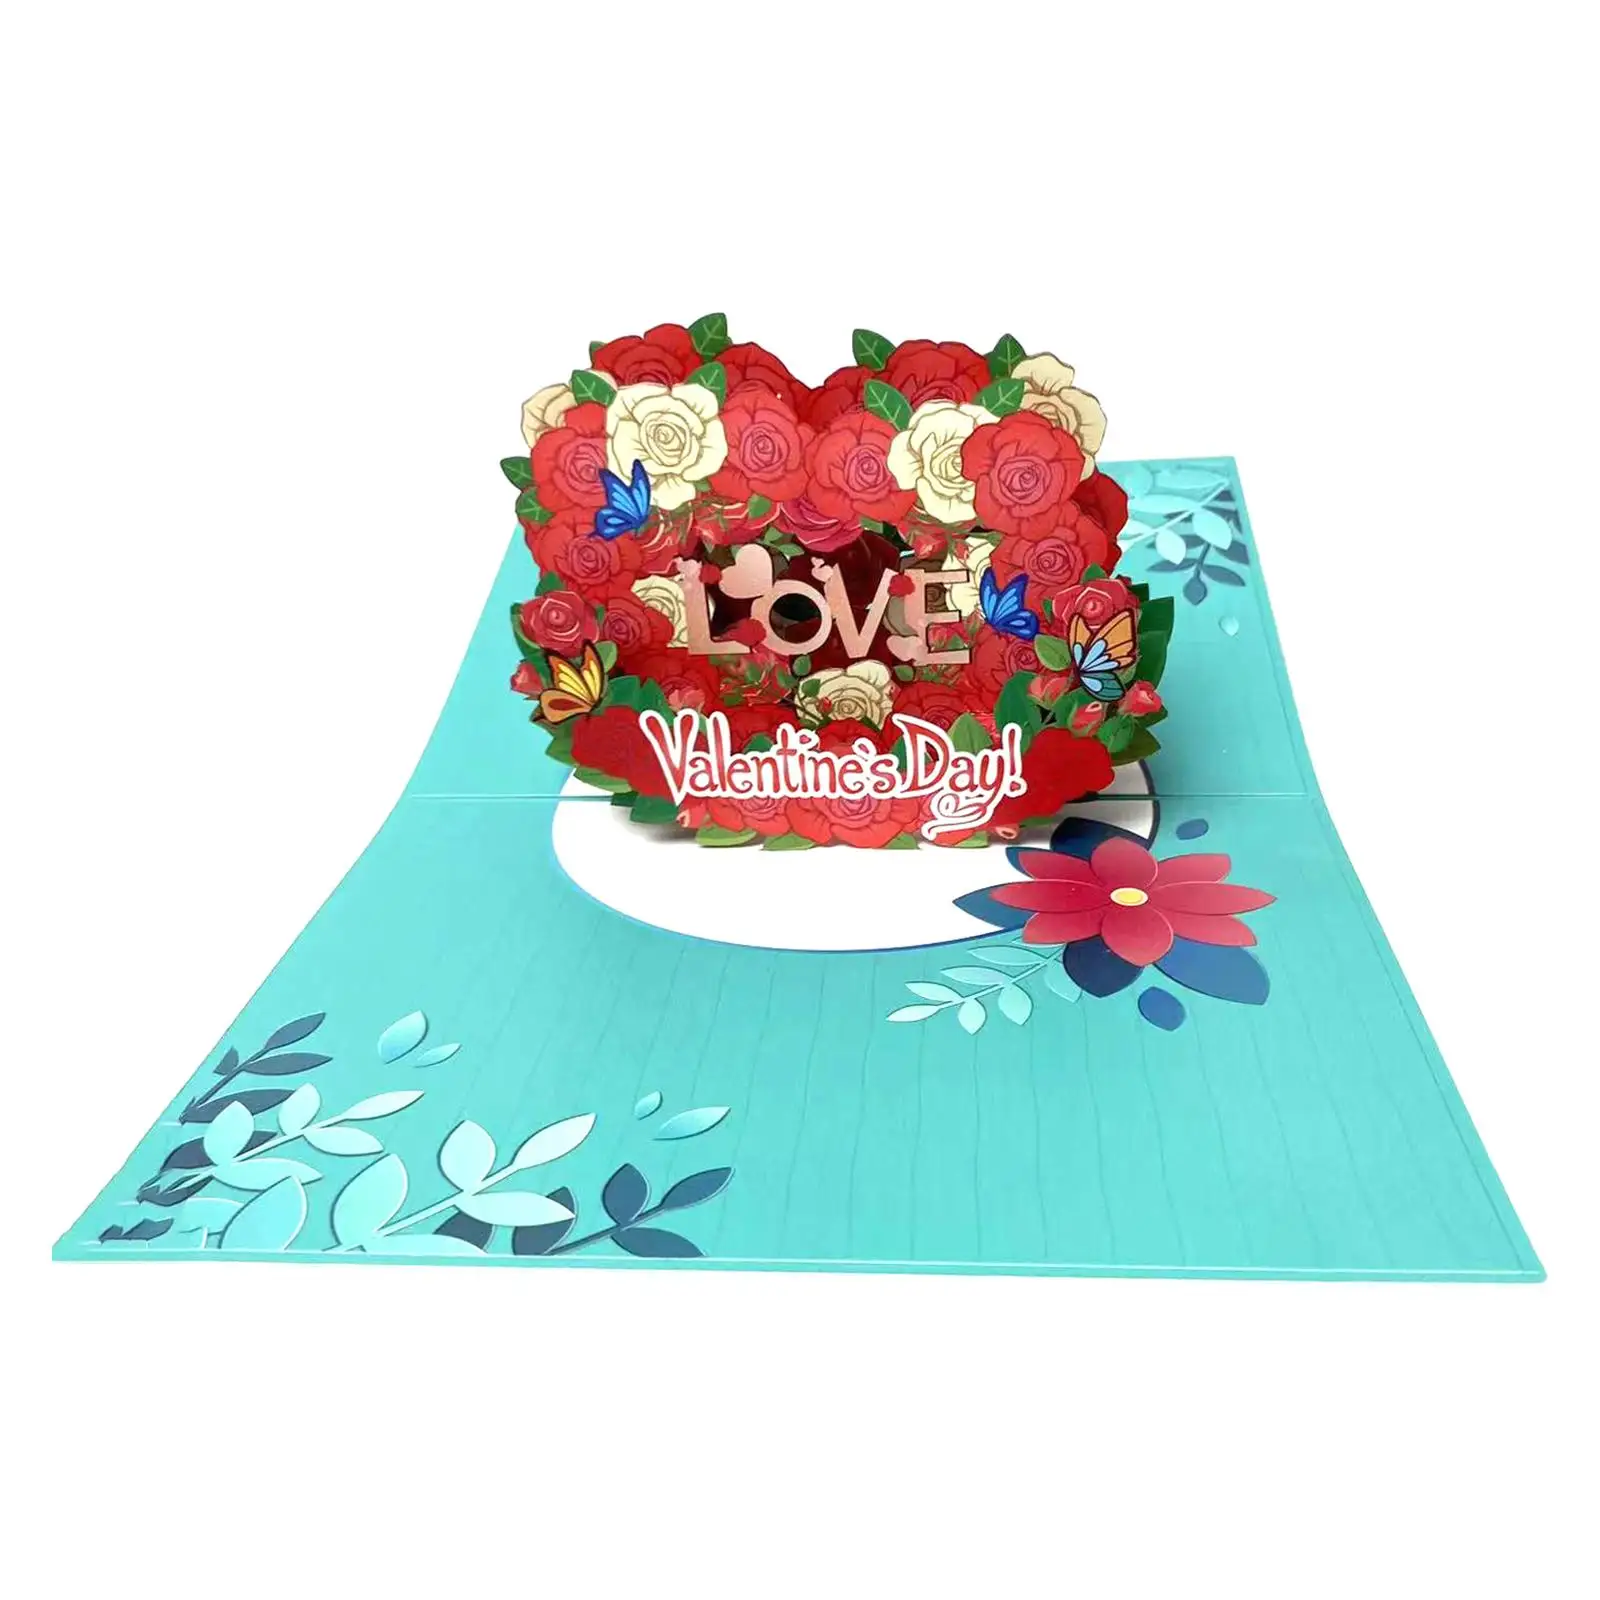 Valentines Day Cards Wedding Card Love Heart Flower Valentine Gift Cards 3D Greeting Cards for Festival Male Couple Boyfriend